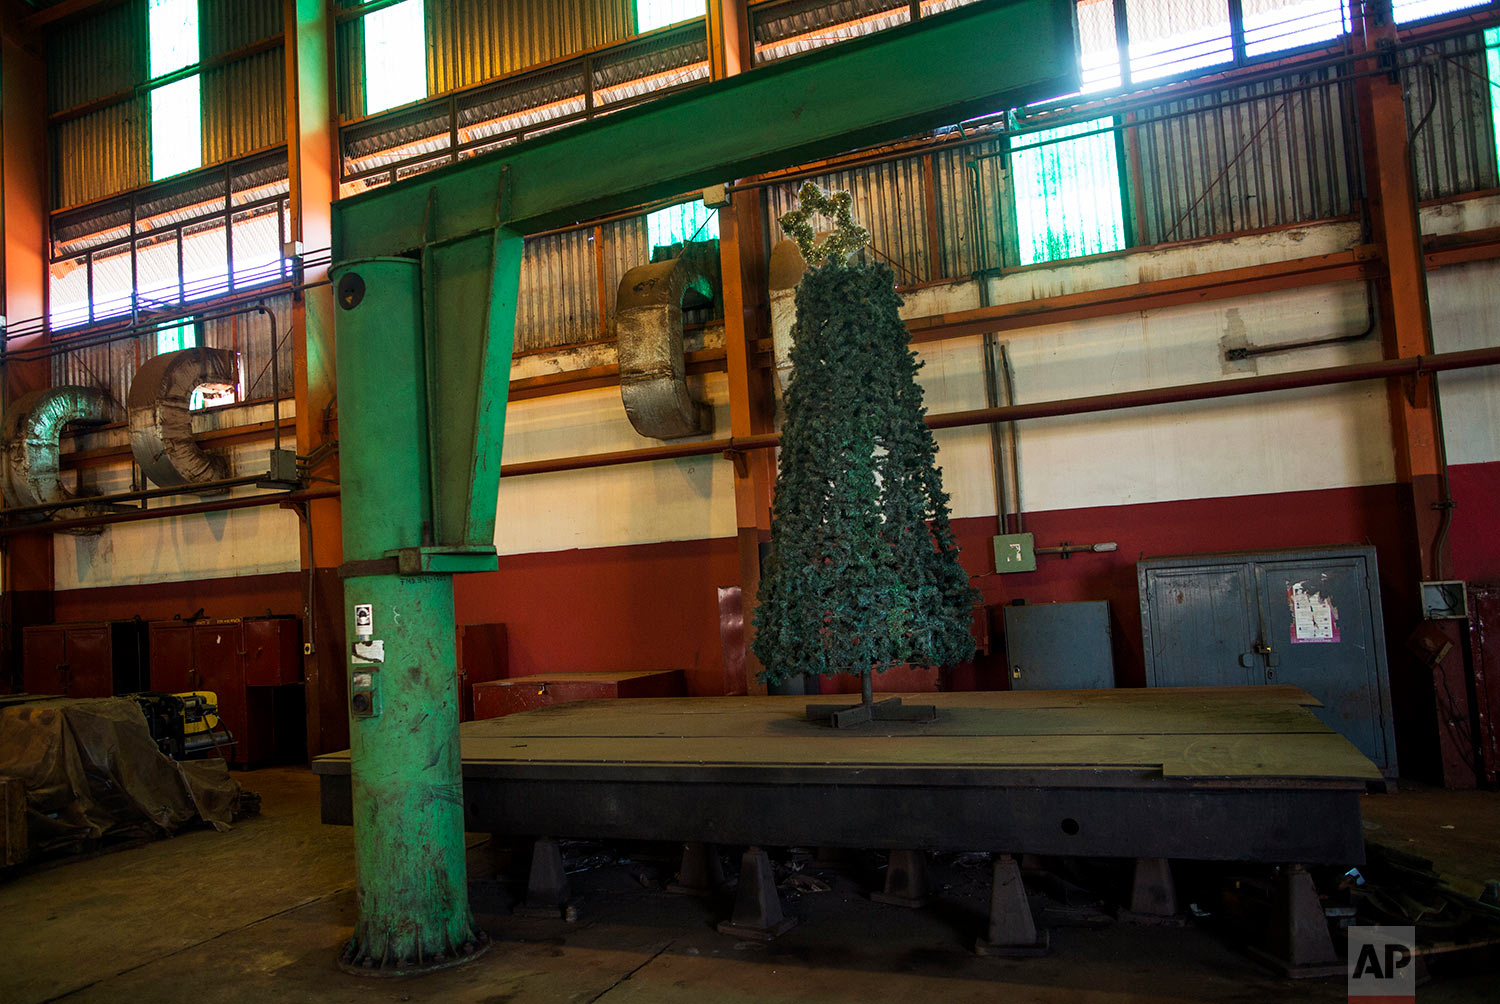  In this Nov. 3, 2017 photo, a Christmas tree decorates the Pellas steel plant in Ciudad Guayana, Bolivar state, Venezuela. Years of neglect and mismanagement have left in decay Ciudad Guayana, a once-thriving would-be Pittsburgh carved from the jung